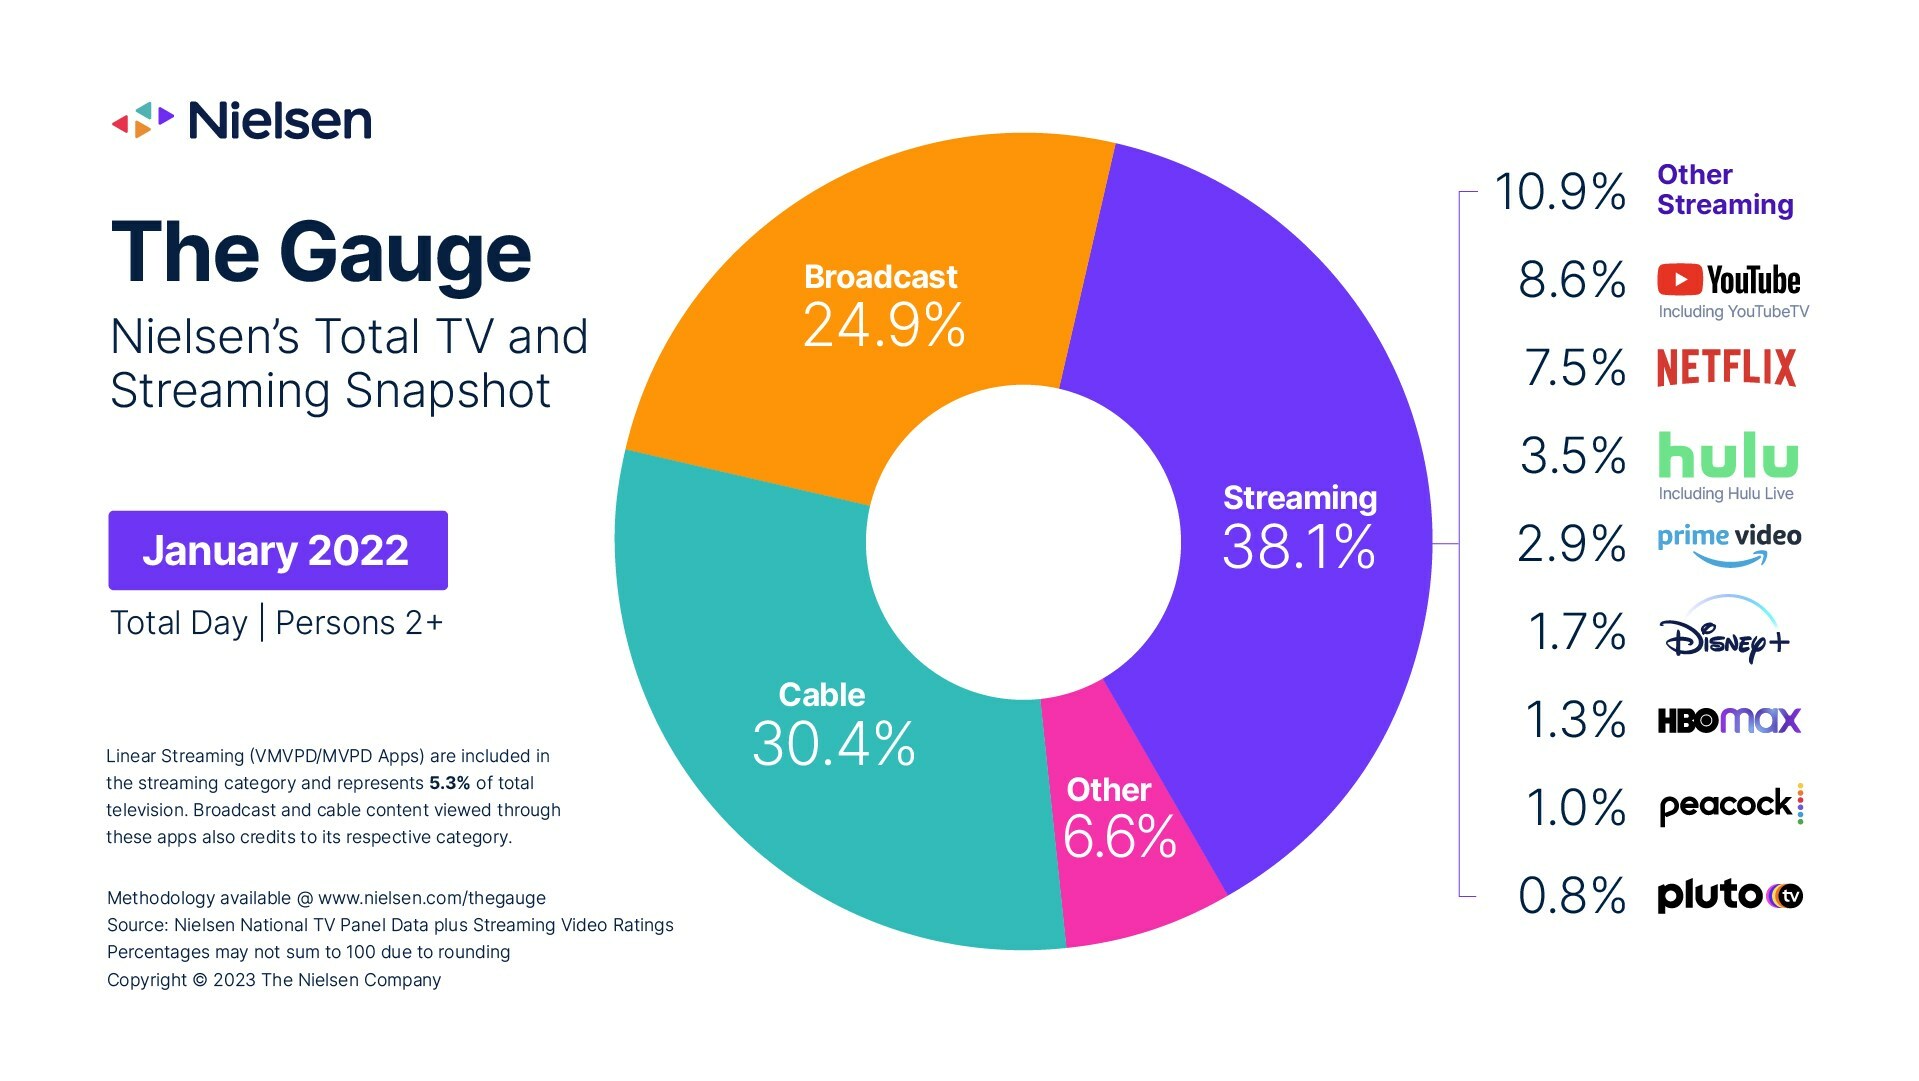 The Gauge - Nielsen U.S. total TV usage snapshot - Streaming (YouTube, Netflix, Hulu, Prime Video, Disney+, HBOMax, Peacock, Pluto TV, Other), Cable TV, Broadcast, Other - January 2023